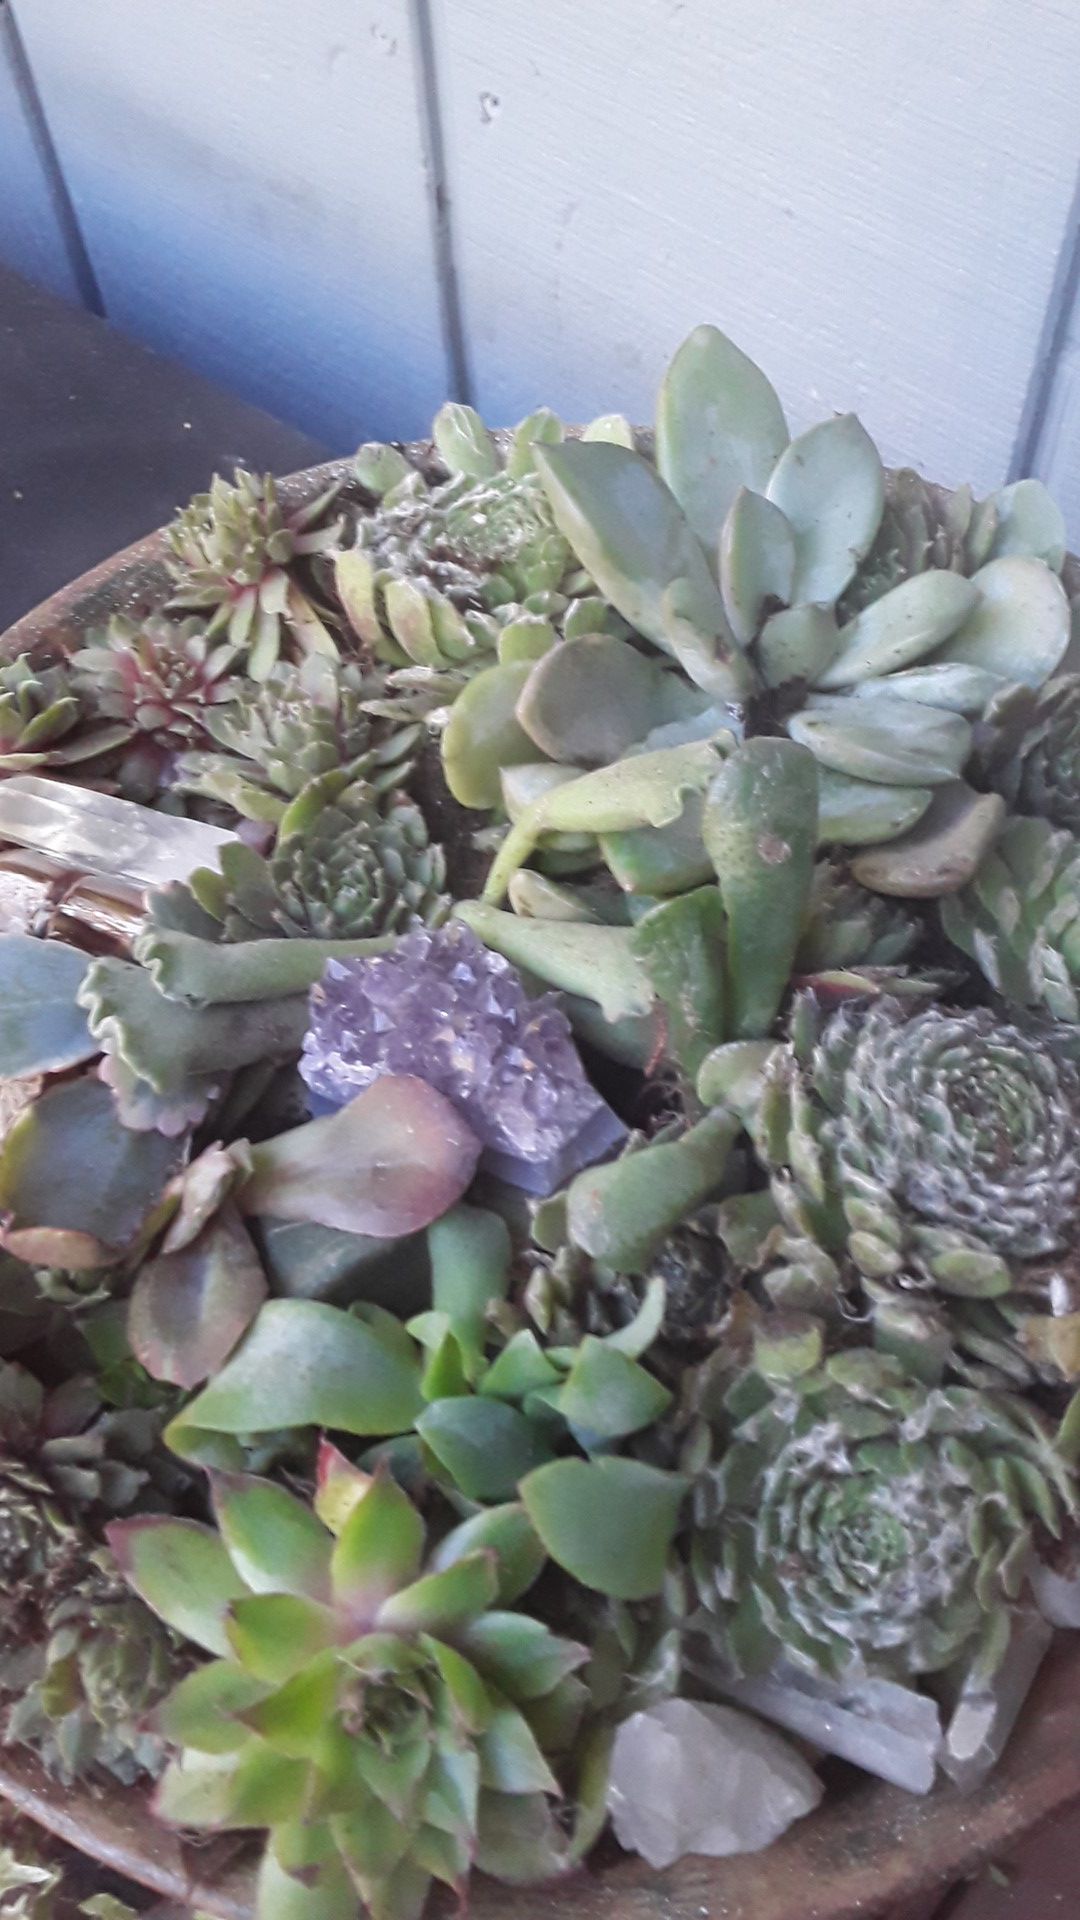 A BUNCH OF SUCCULENTS IN A PLANTER